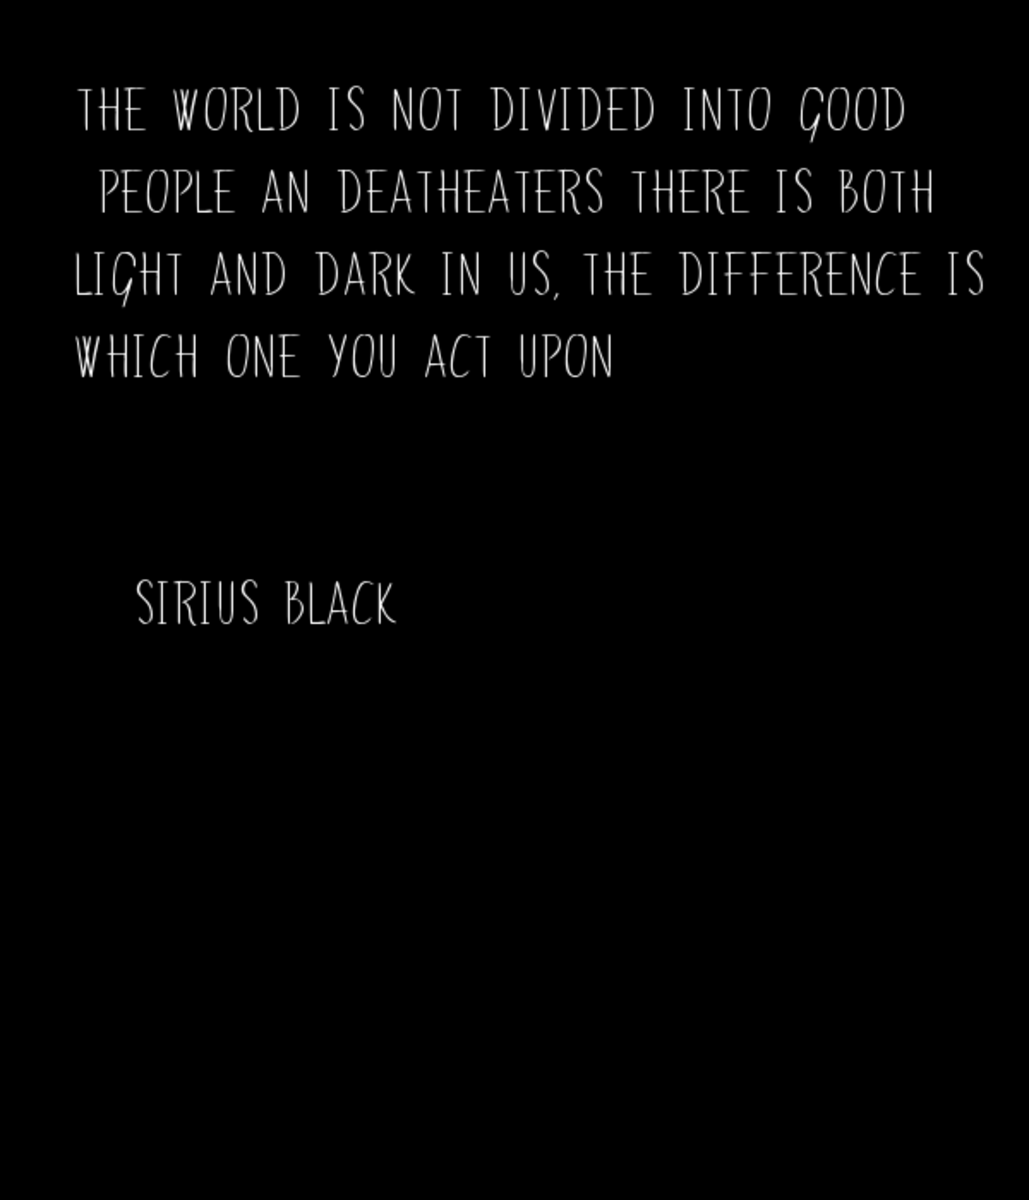 "There is both light and dark in us."